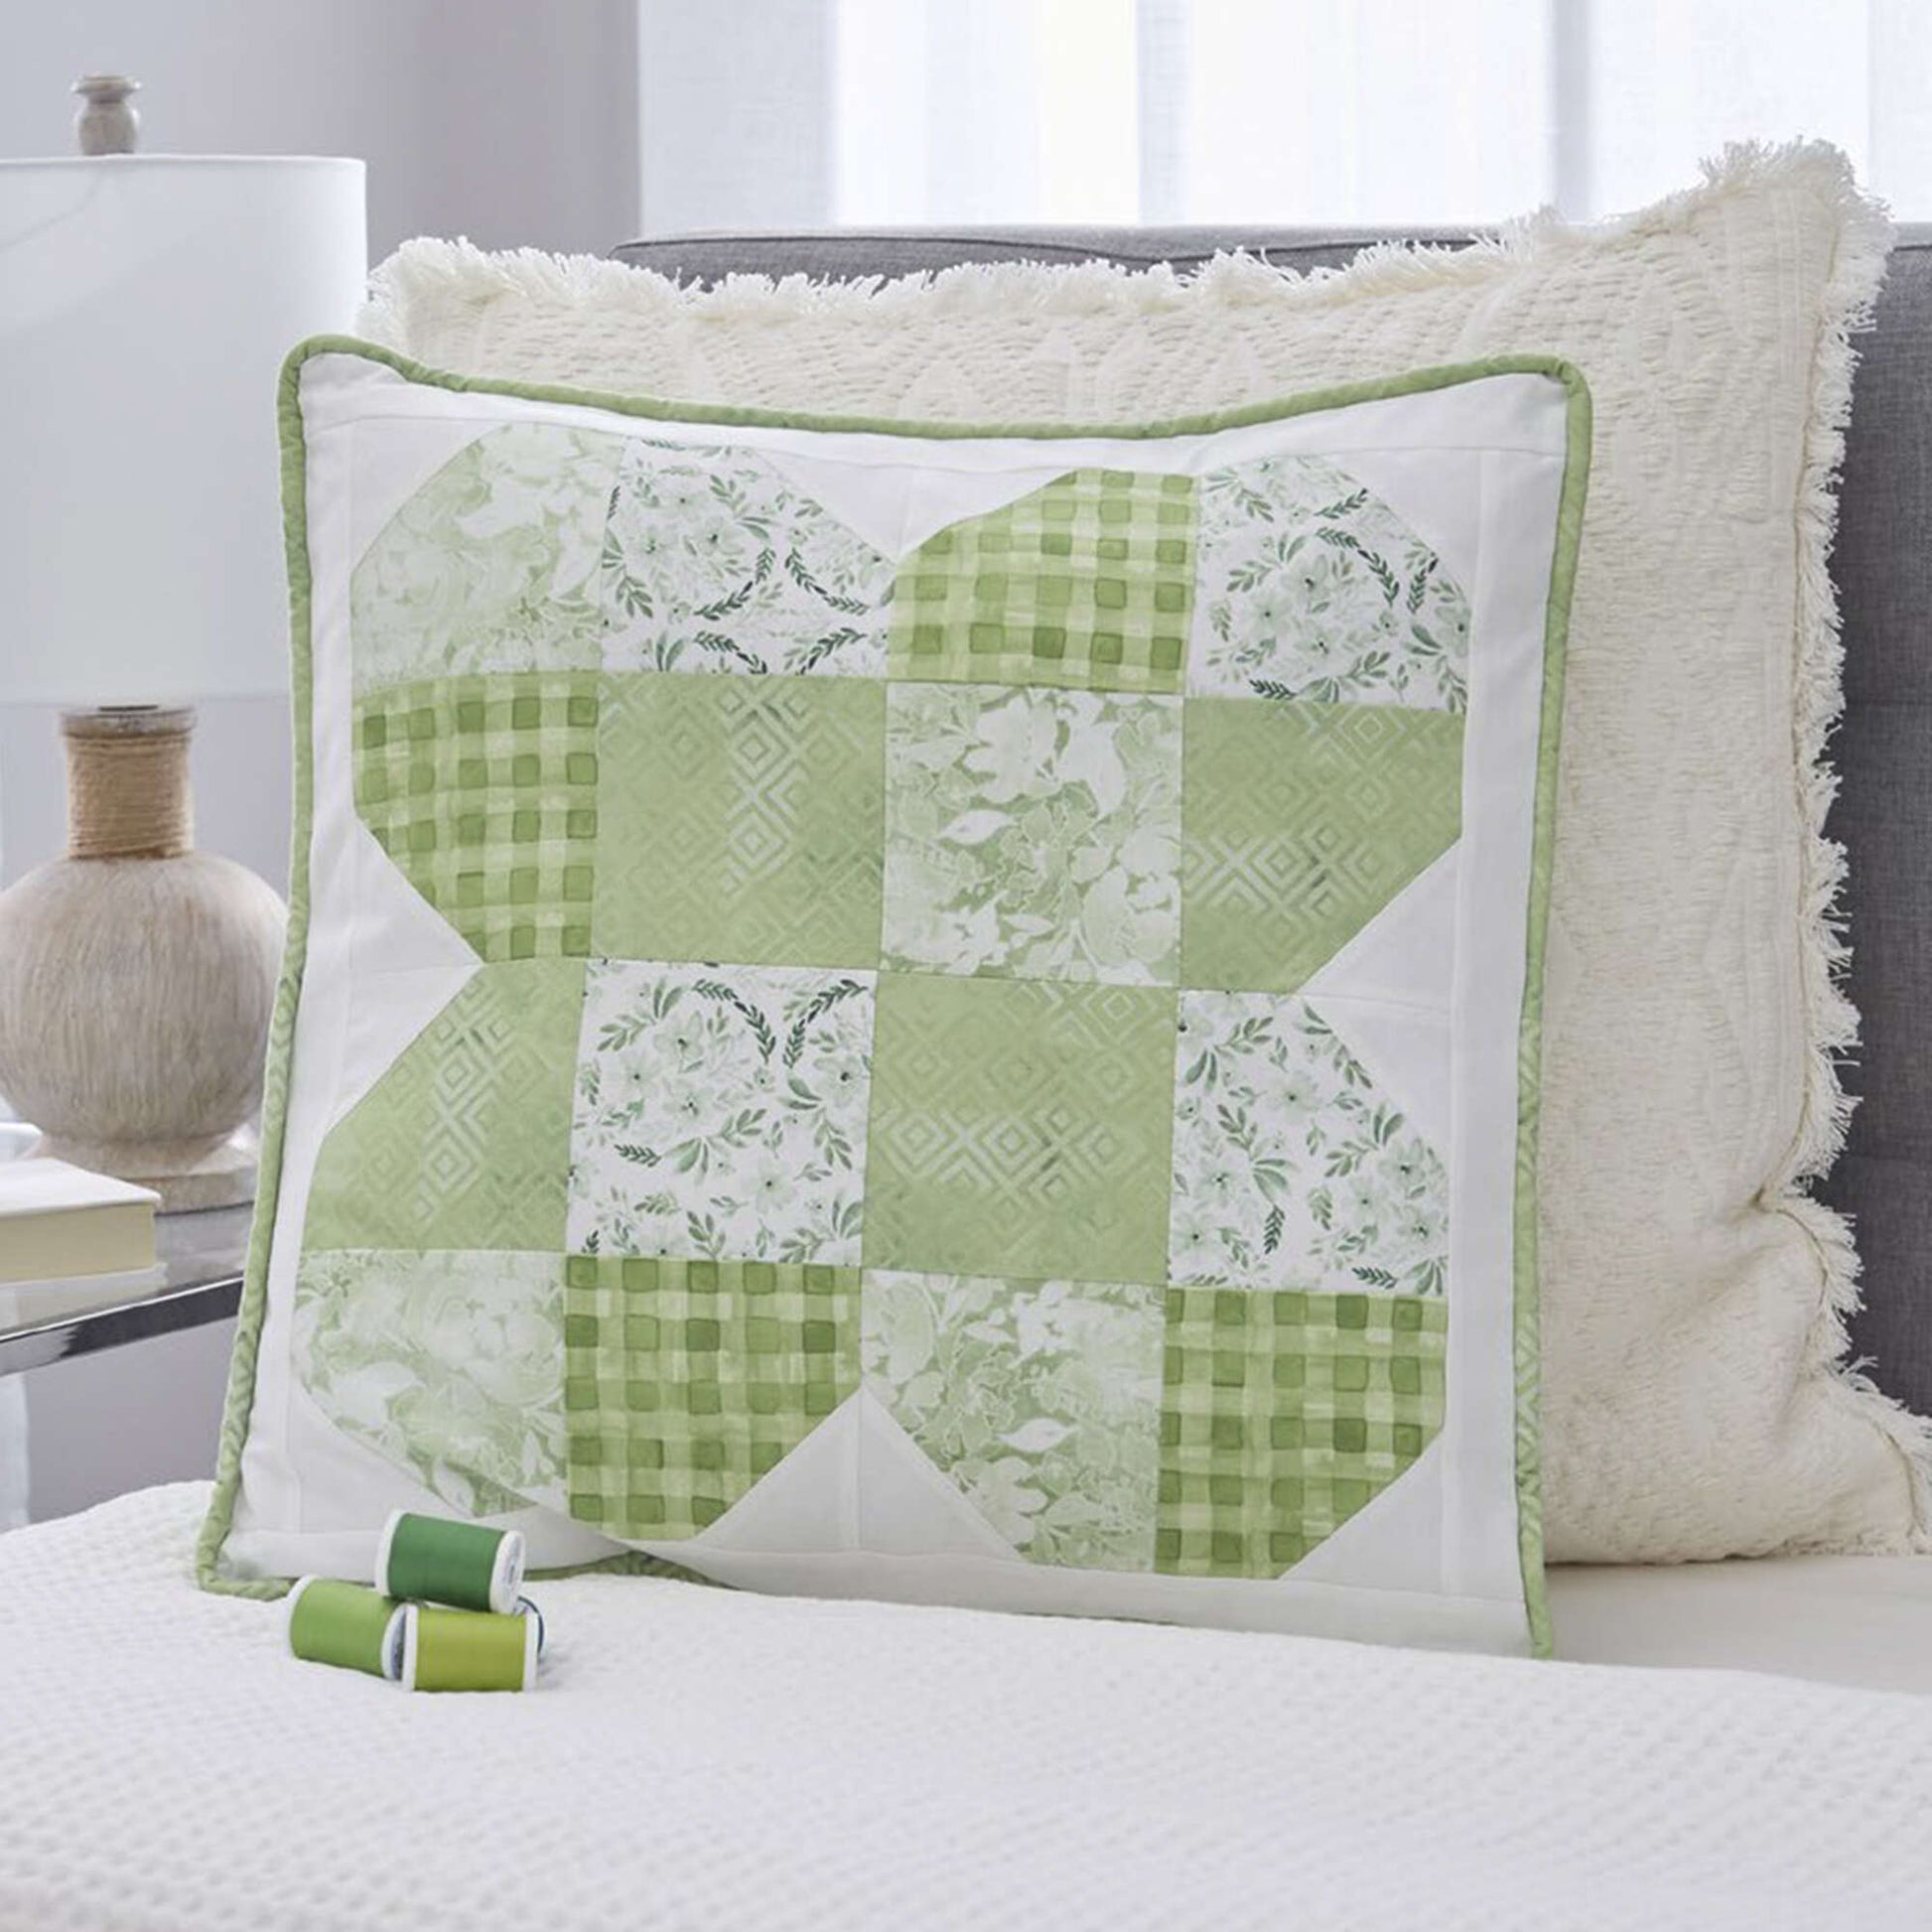 Free Coats Quilting & Clark Subtly Shamrock Patchwork Pillow Pattern